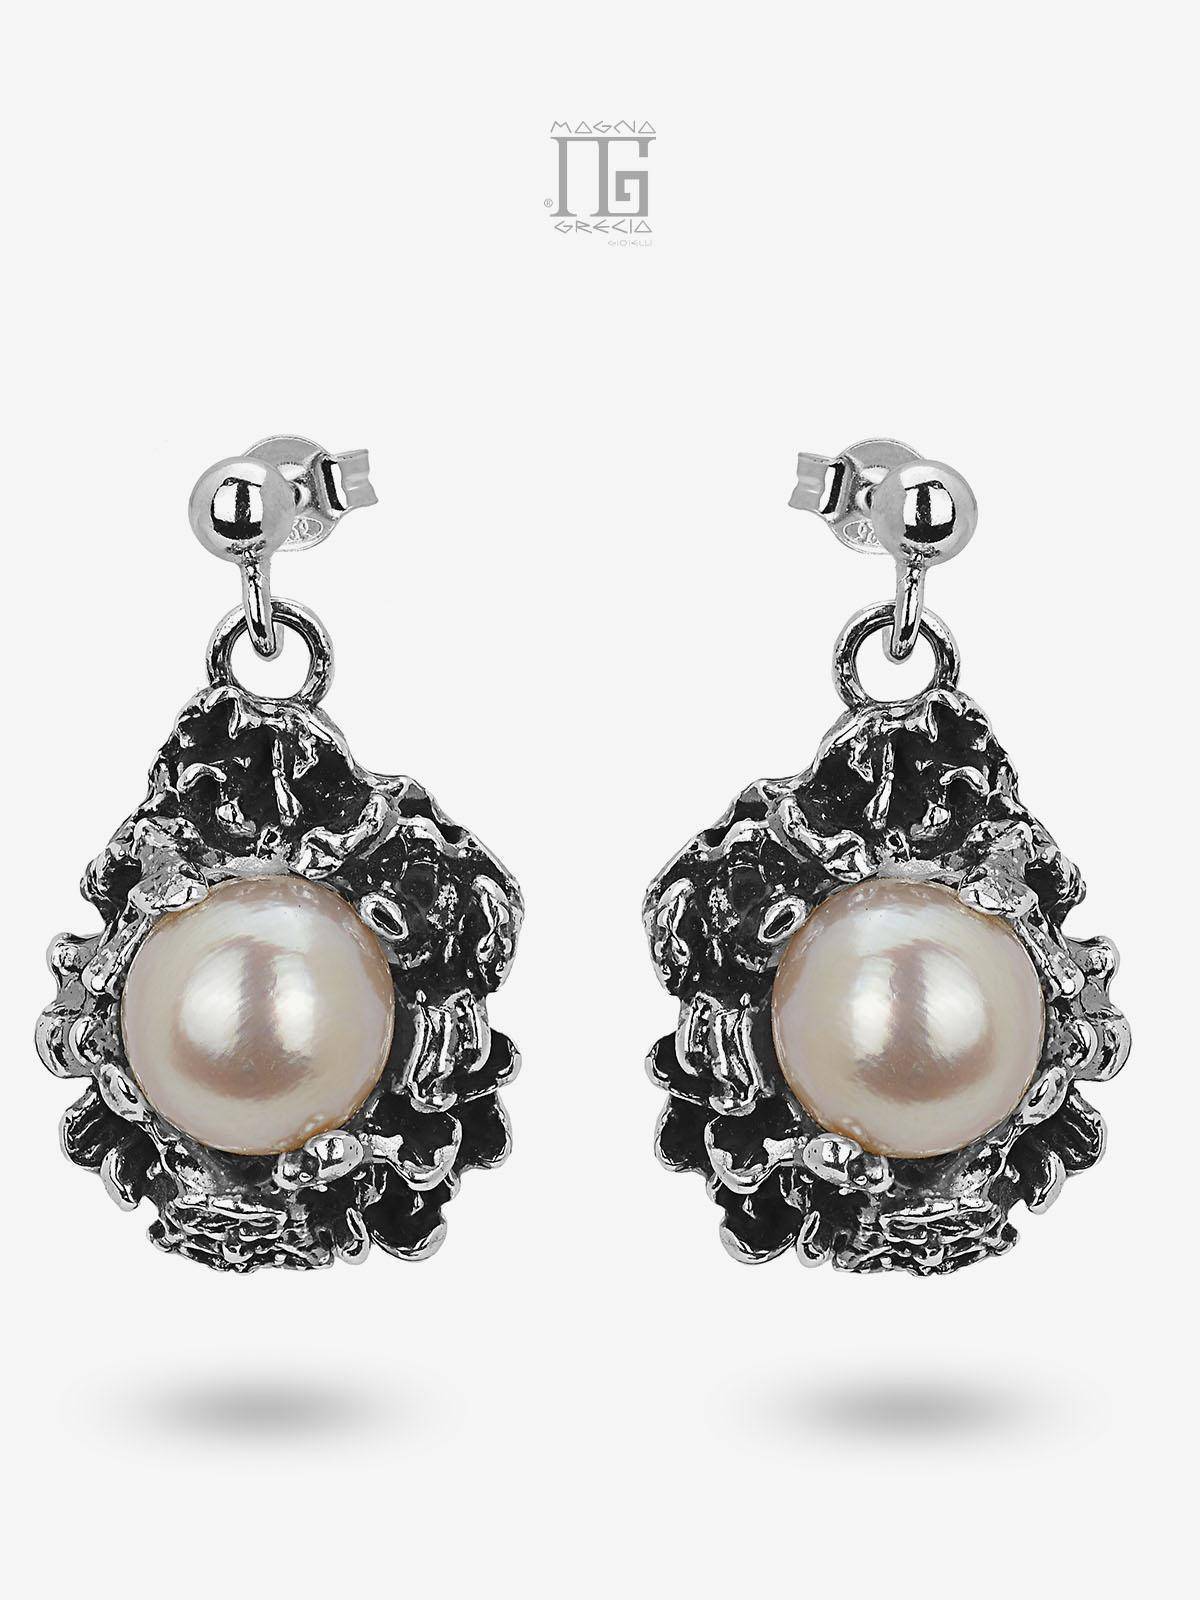 Silver earrings with Apotropaic Mask and natural freshwater pearls in lilac color Cod. MGK 4103 V